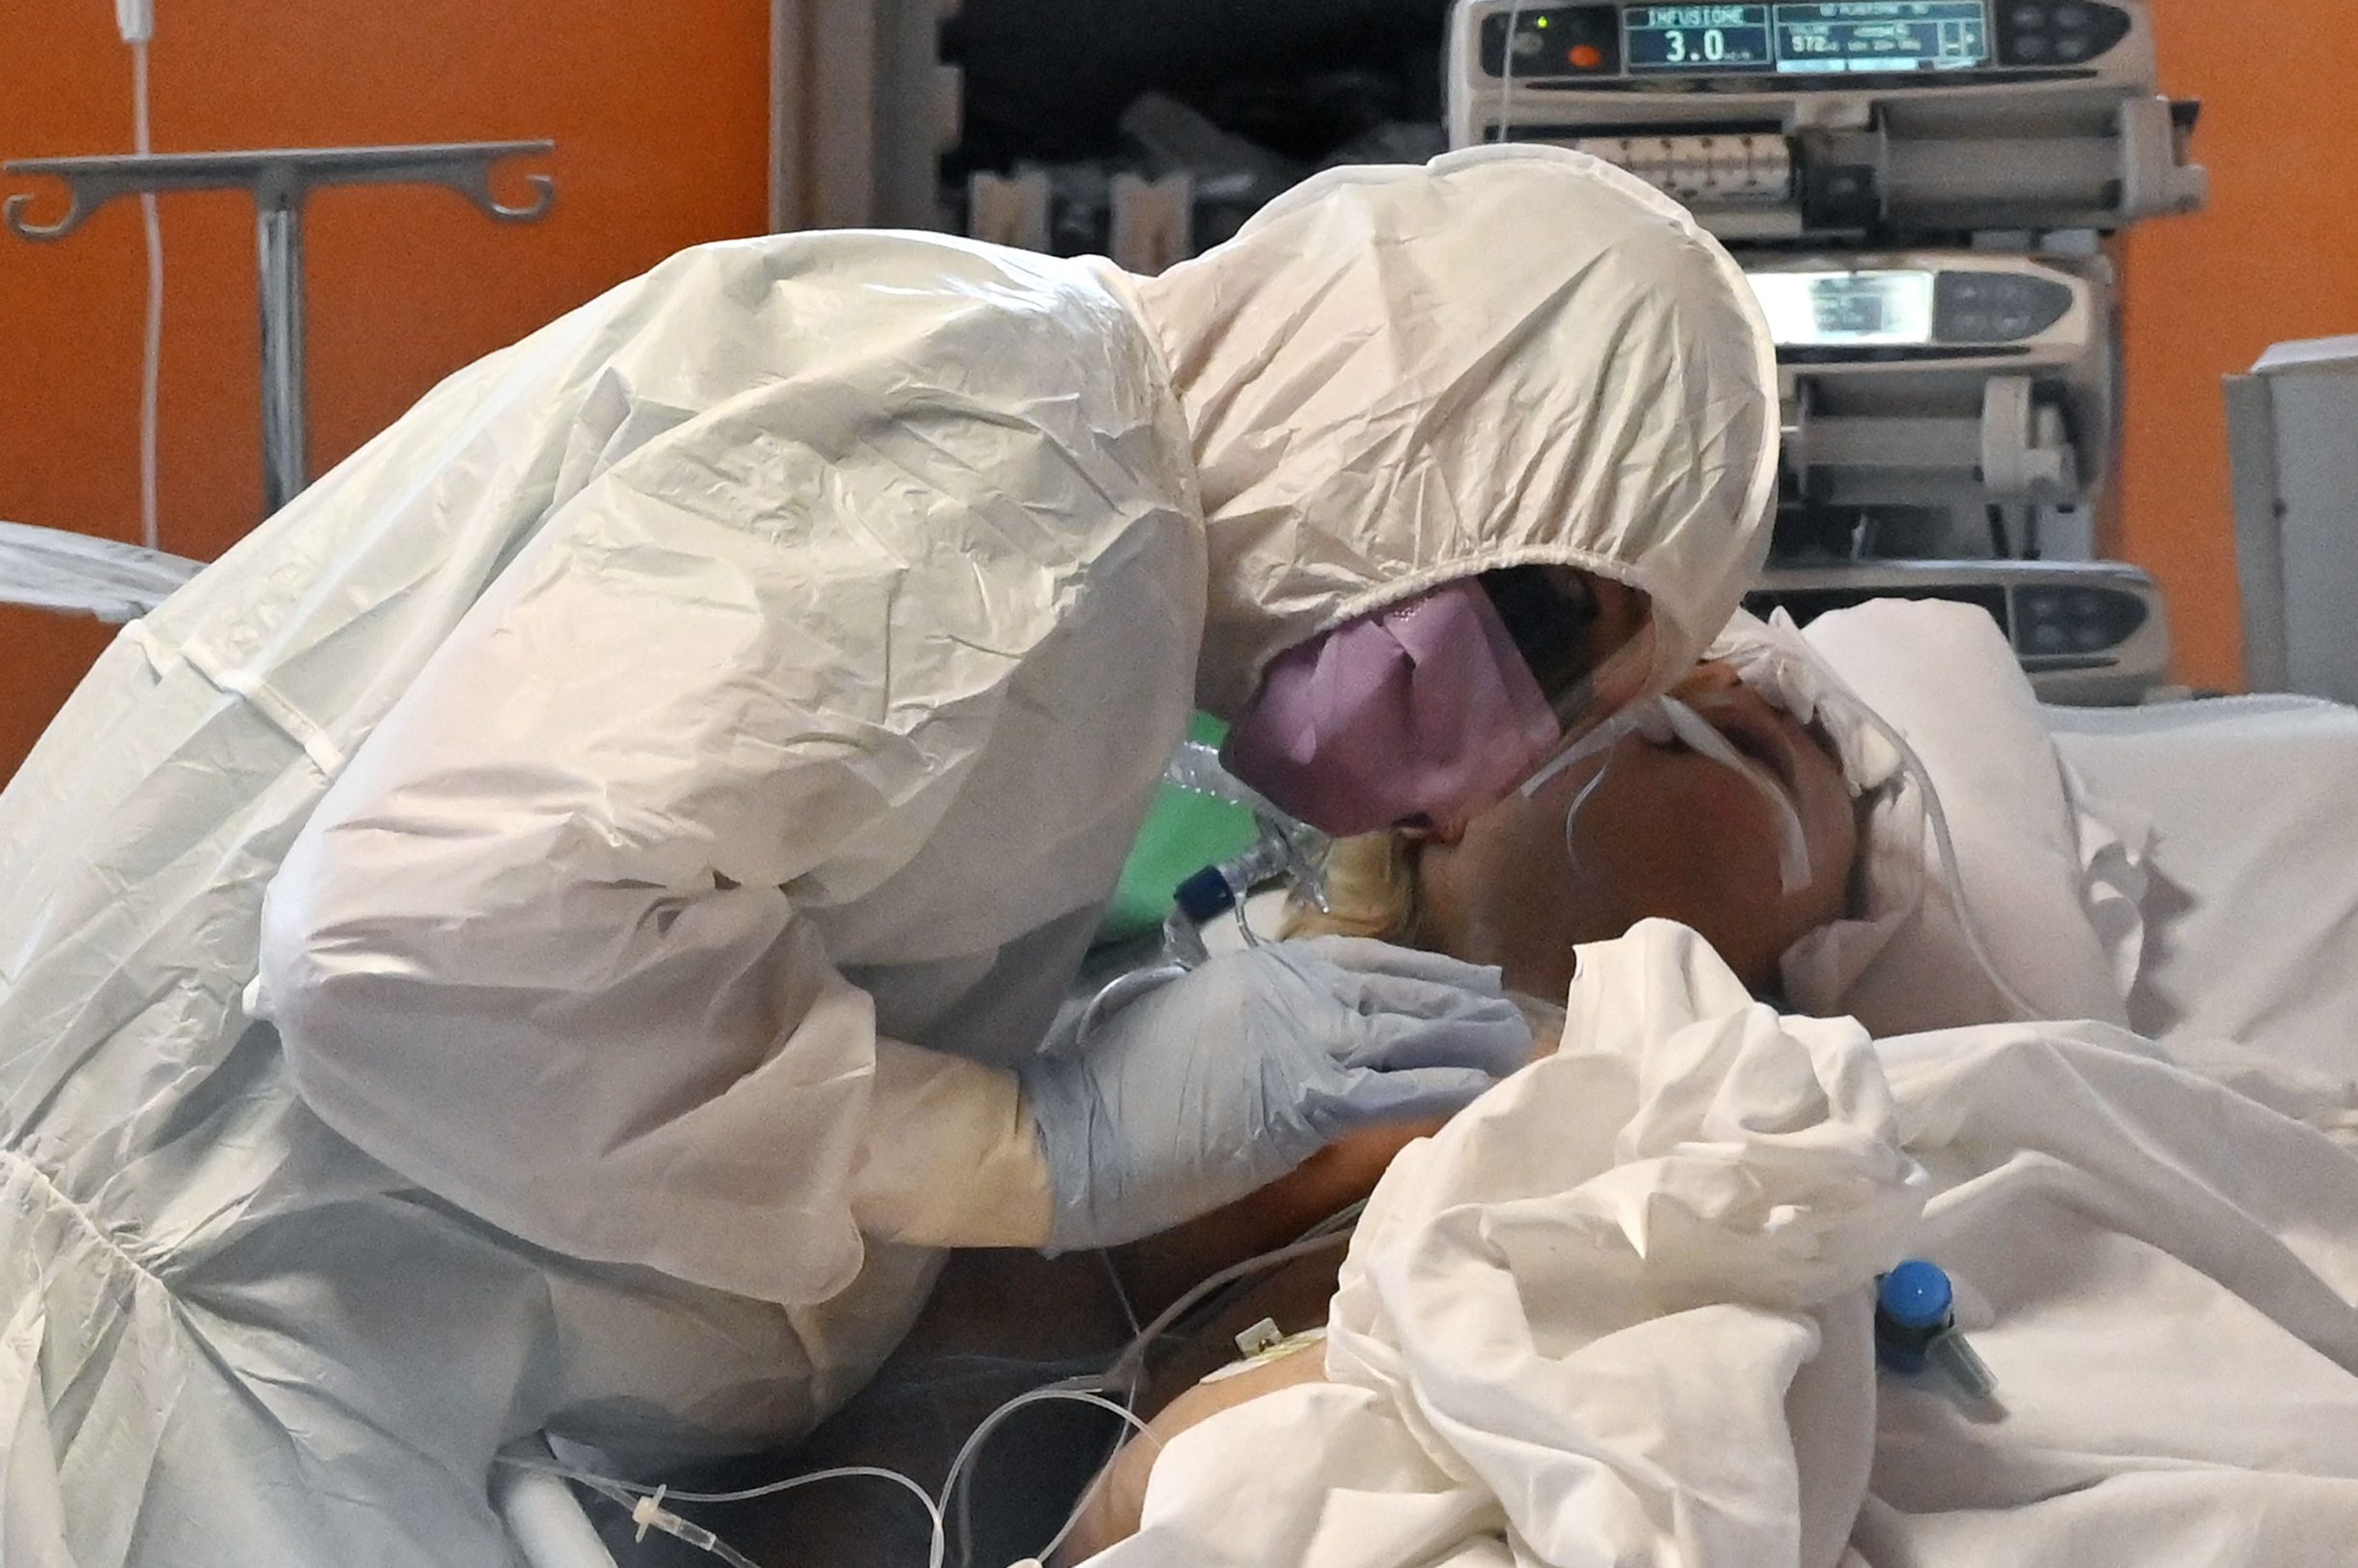 TOPSHOT - A medical worker in protective gear tends to a patient on March 24, 2020 at the new COVID 3 level intensive care unit for coronavirus COVID-19 cases at the Casal Palocco hospital near Rome, during the country's lockdown aimed at stopping the spread of the COVID-19 (new coronavirus) pandemic. (Photo by Alberto PIZZOLI / AFP)